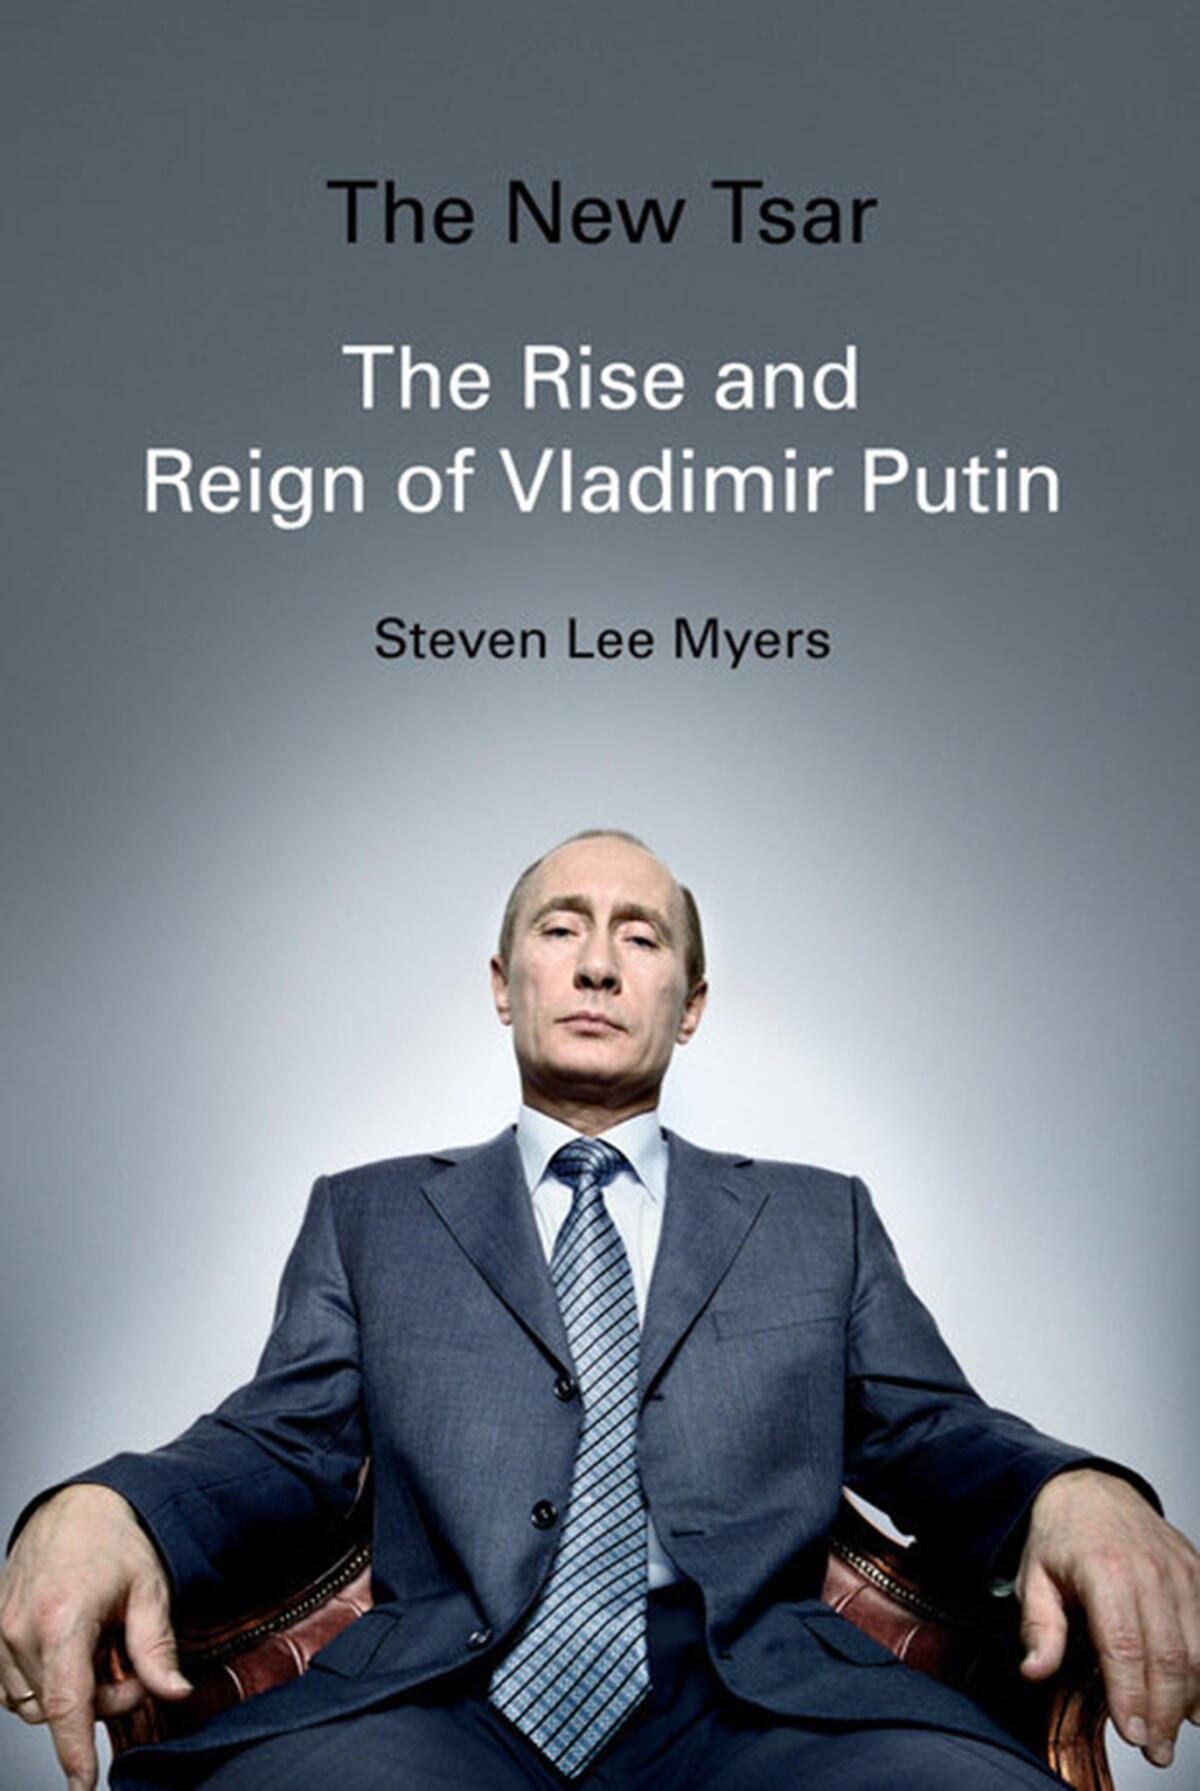 "The New Tsar: The Rise and Reign of Vladimir Putin" by Steven Lee Myers